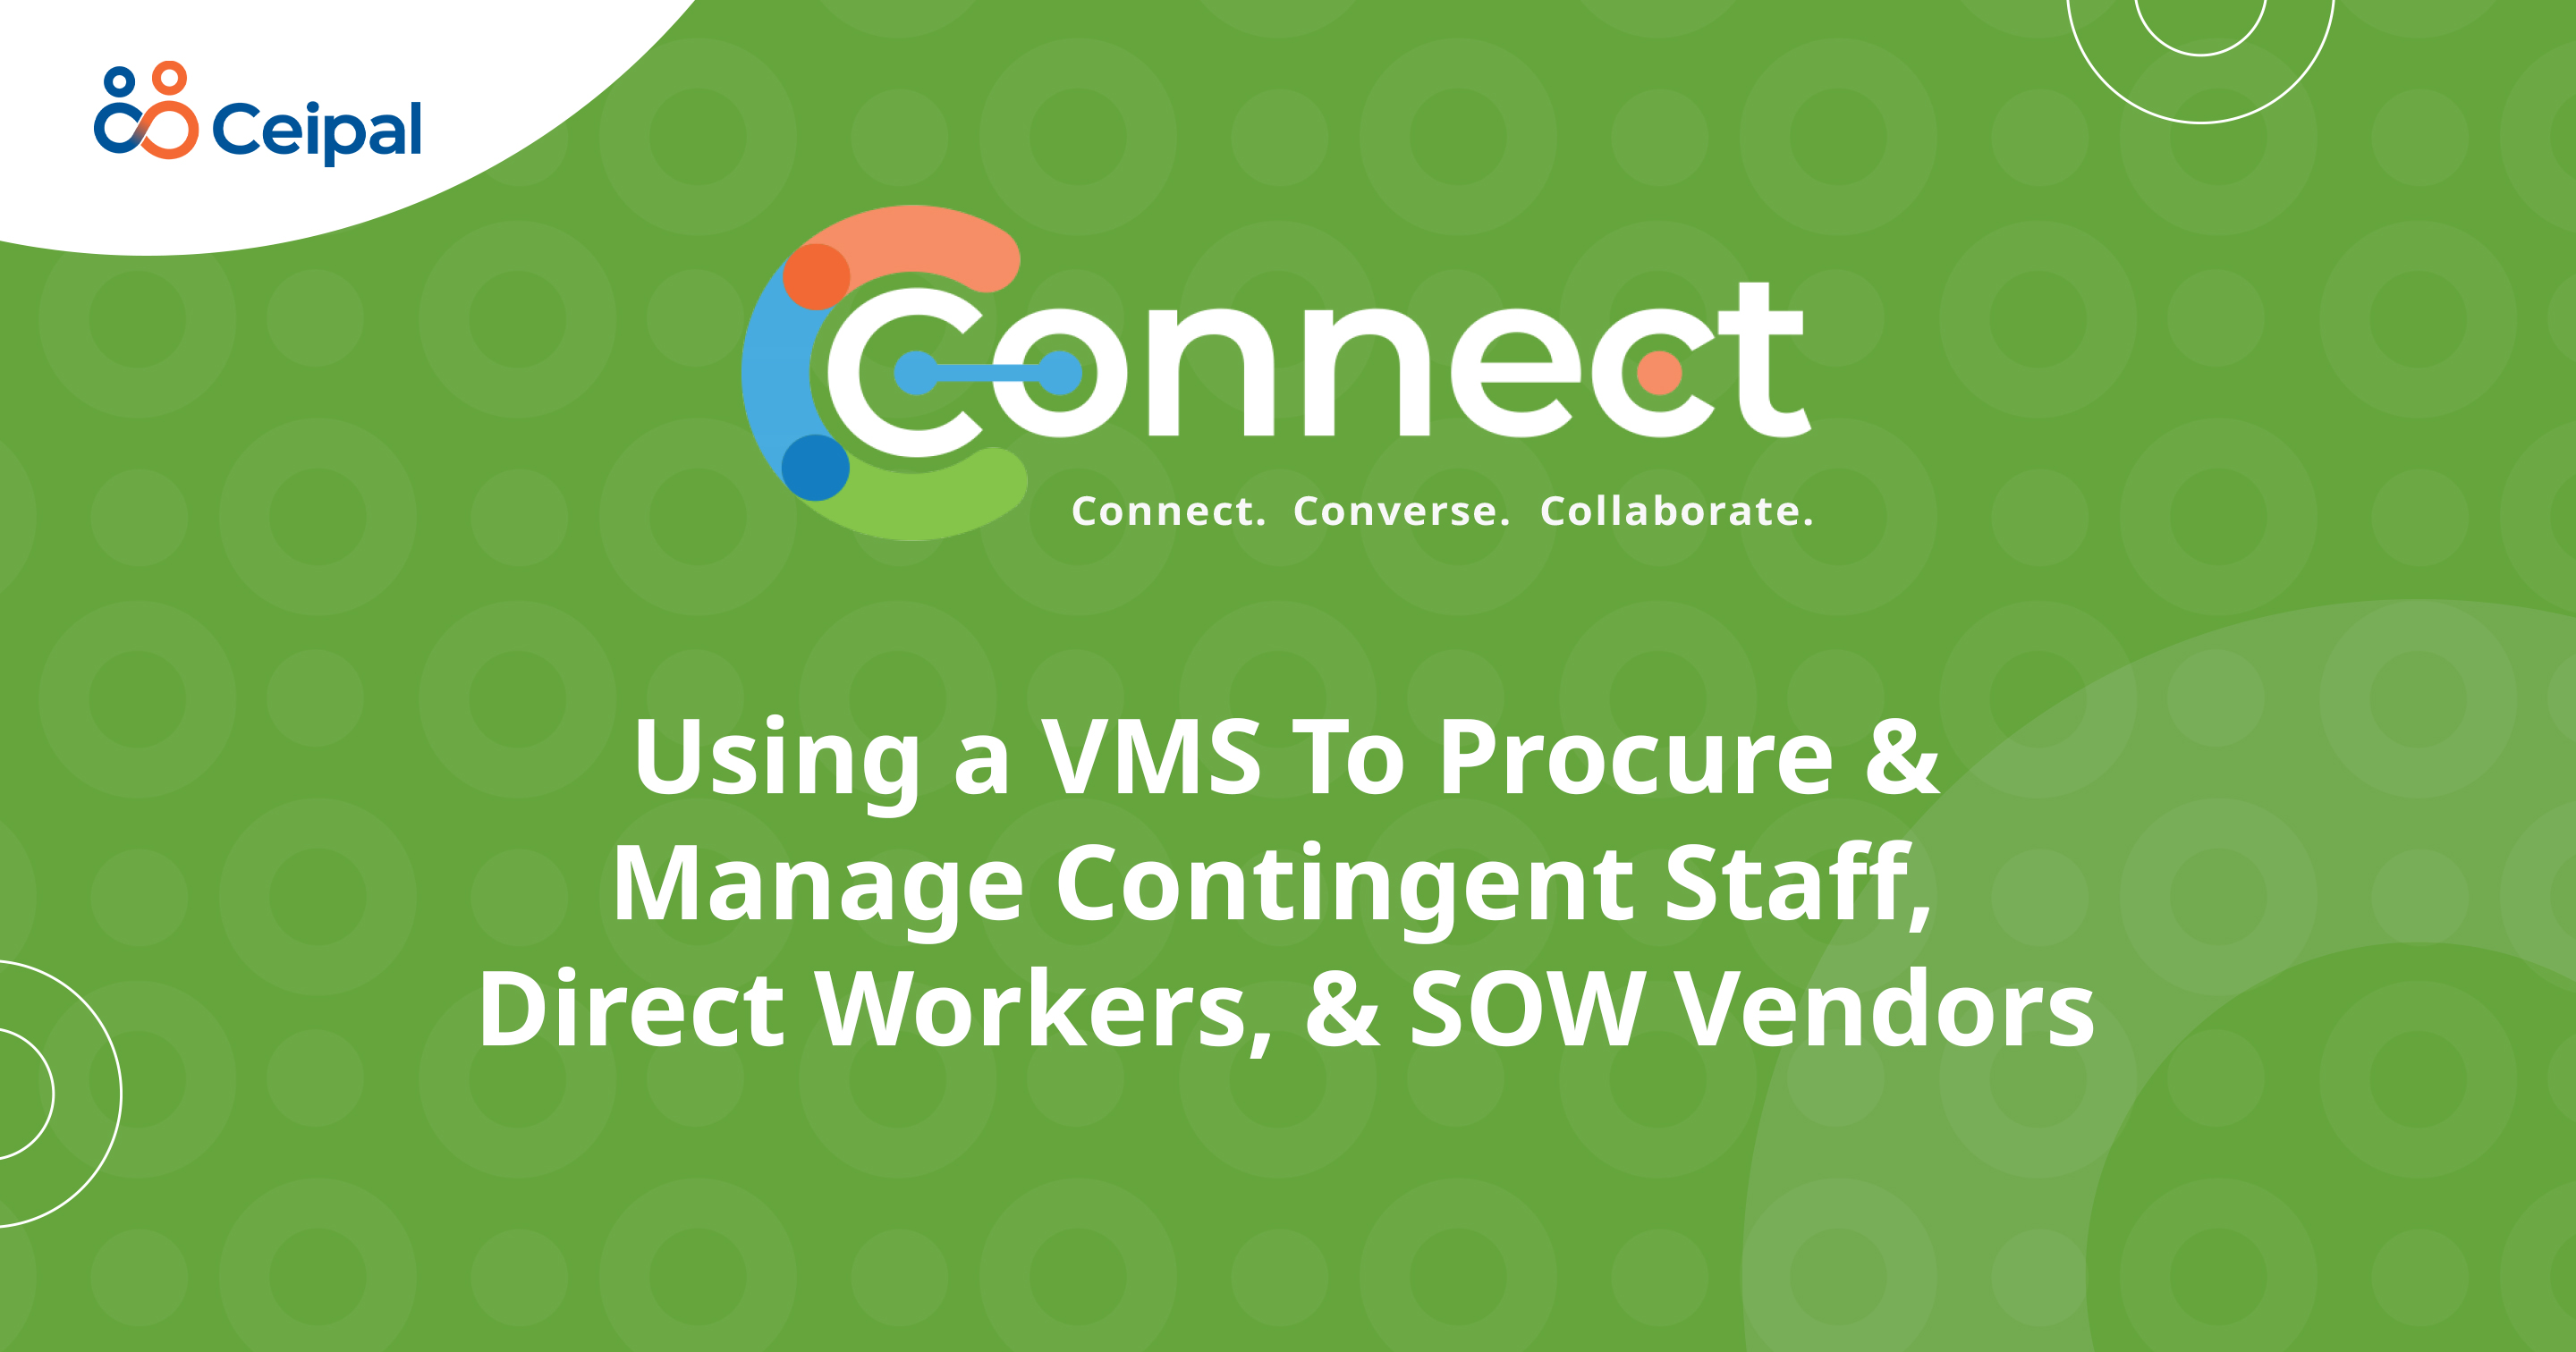 Using a VMS To Procure & Manage Contingent Staff, Direct Workers, & SOW Vendors